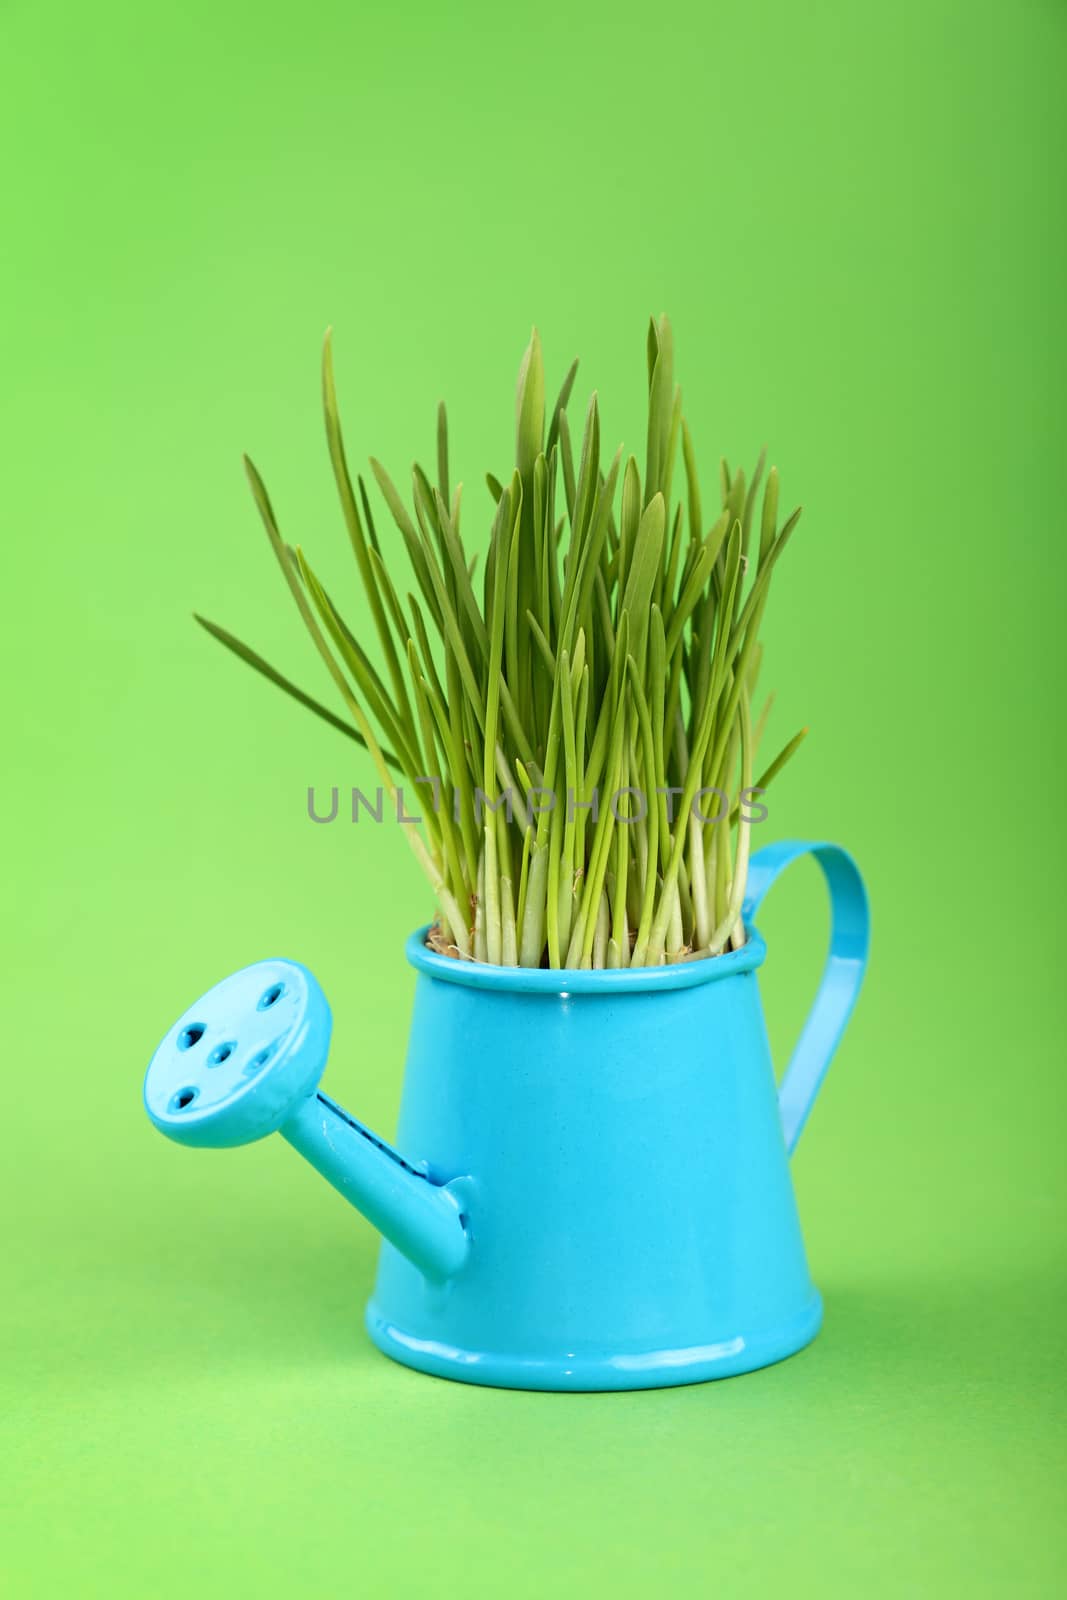 Spring fresh grass growing in small blue metal watering pot, close up over green paper background, low angle side view